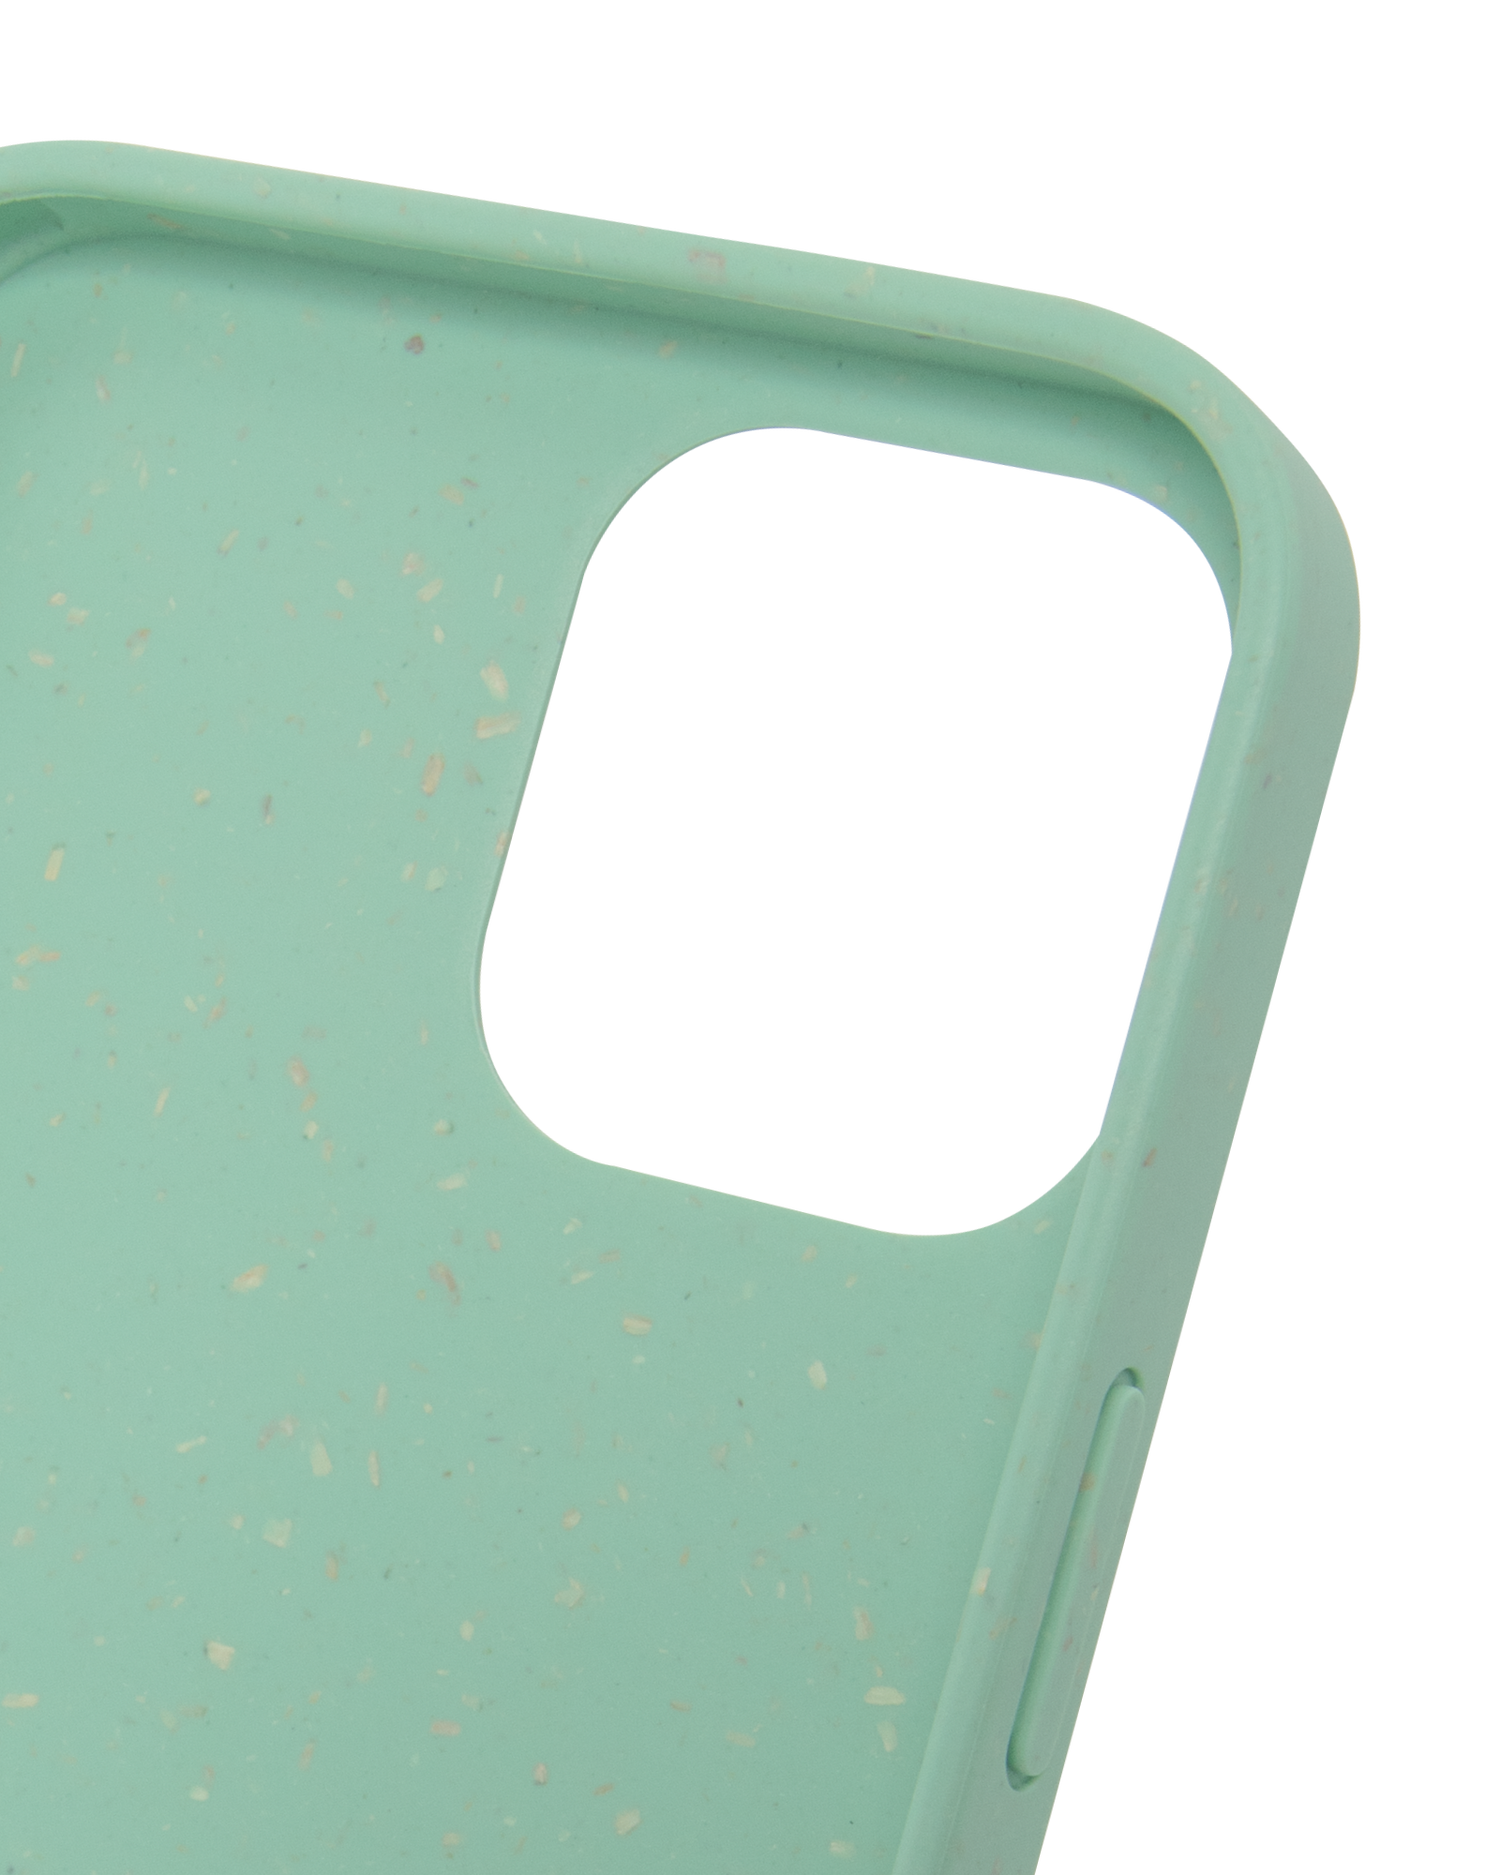 Light Green Eco-Friendly Phone Case for Apple iPhone 12 Pro Max: Details inside